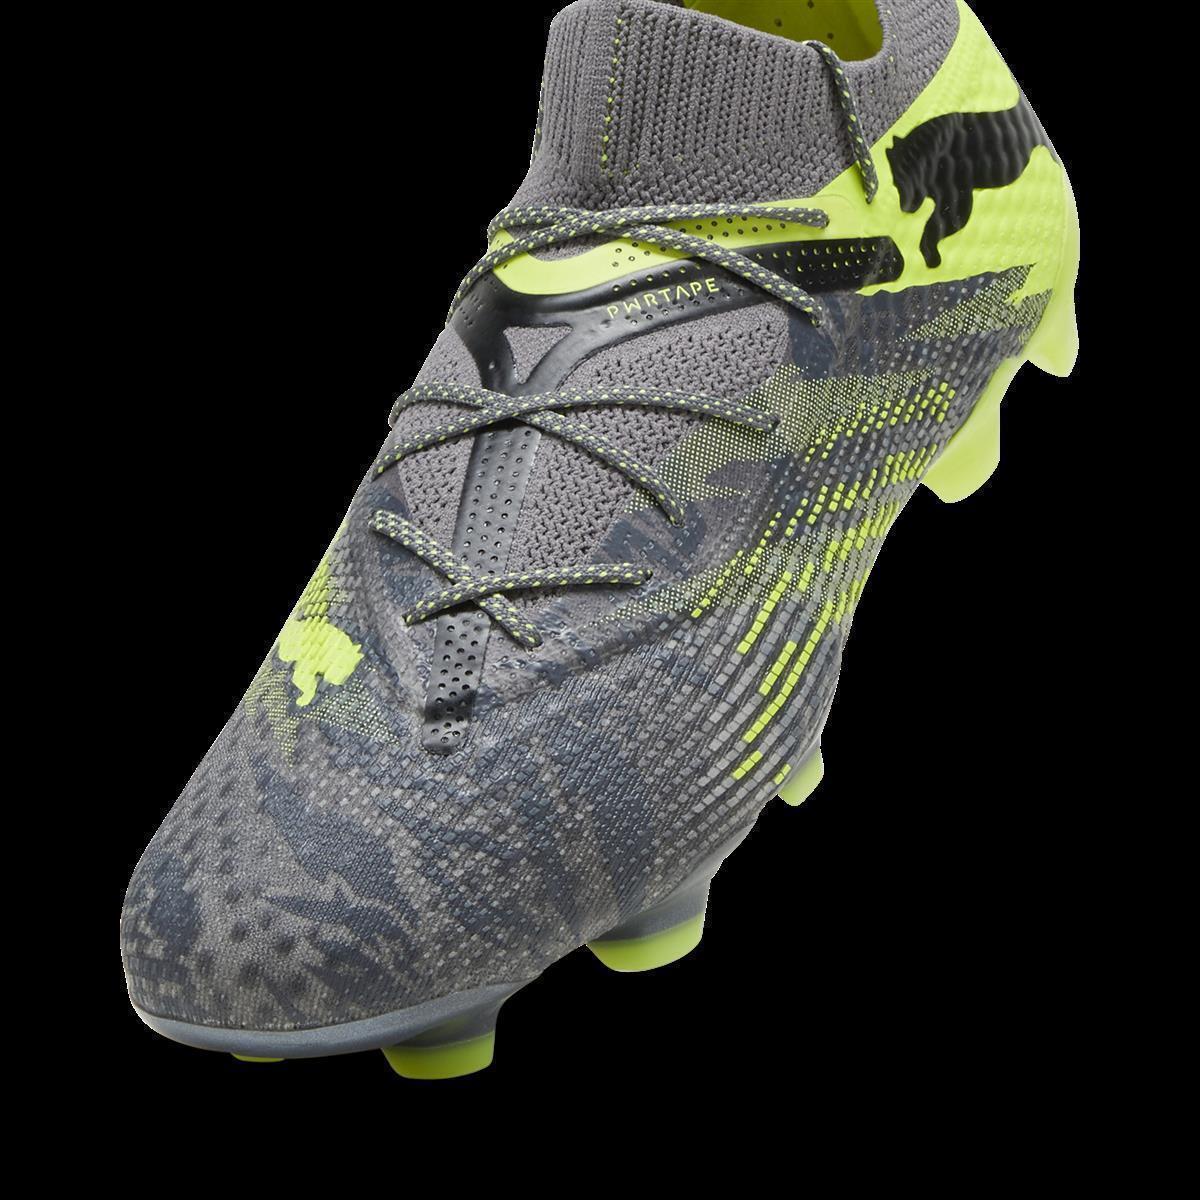 PUMA FUTURE 7 ULTIMATE RUSH FG/AG STRONG GRAY/COOL DARK GRAY/ELECTRIC LIME